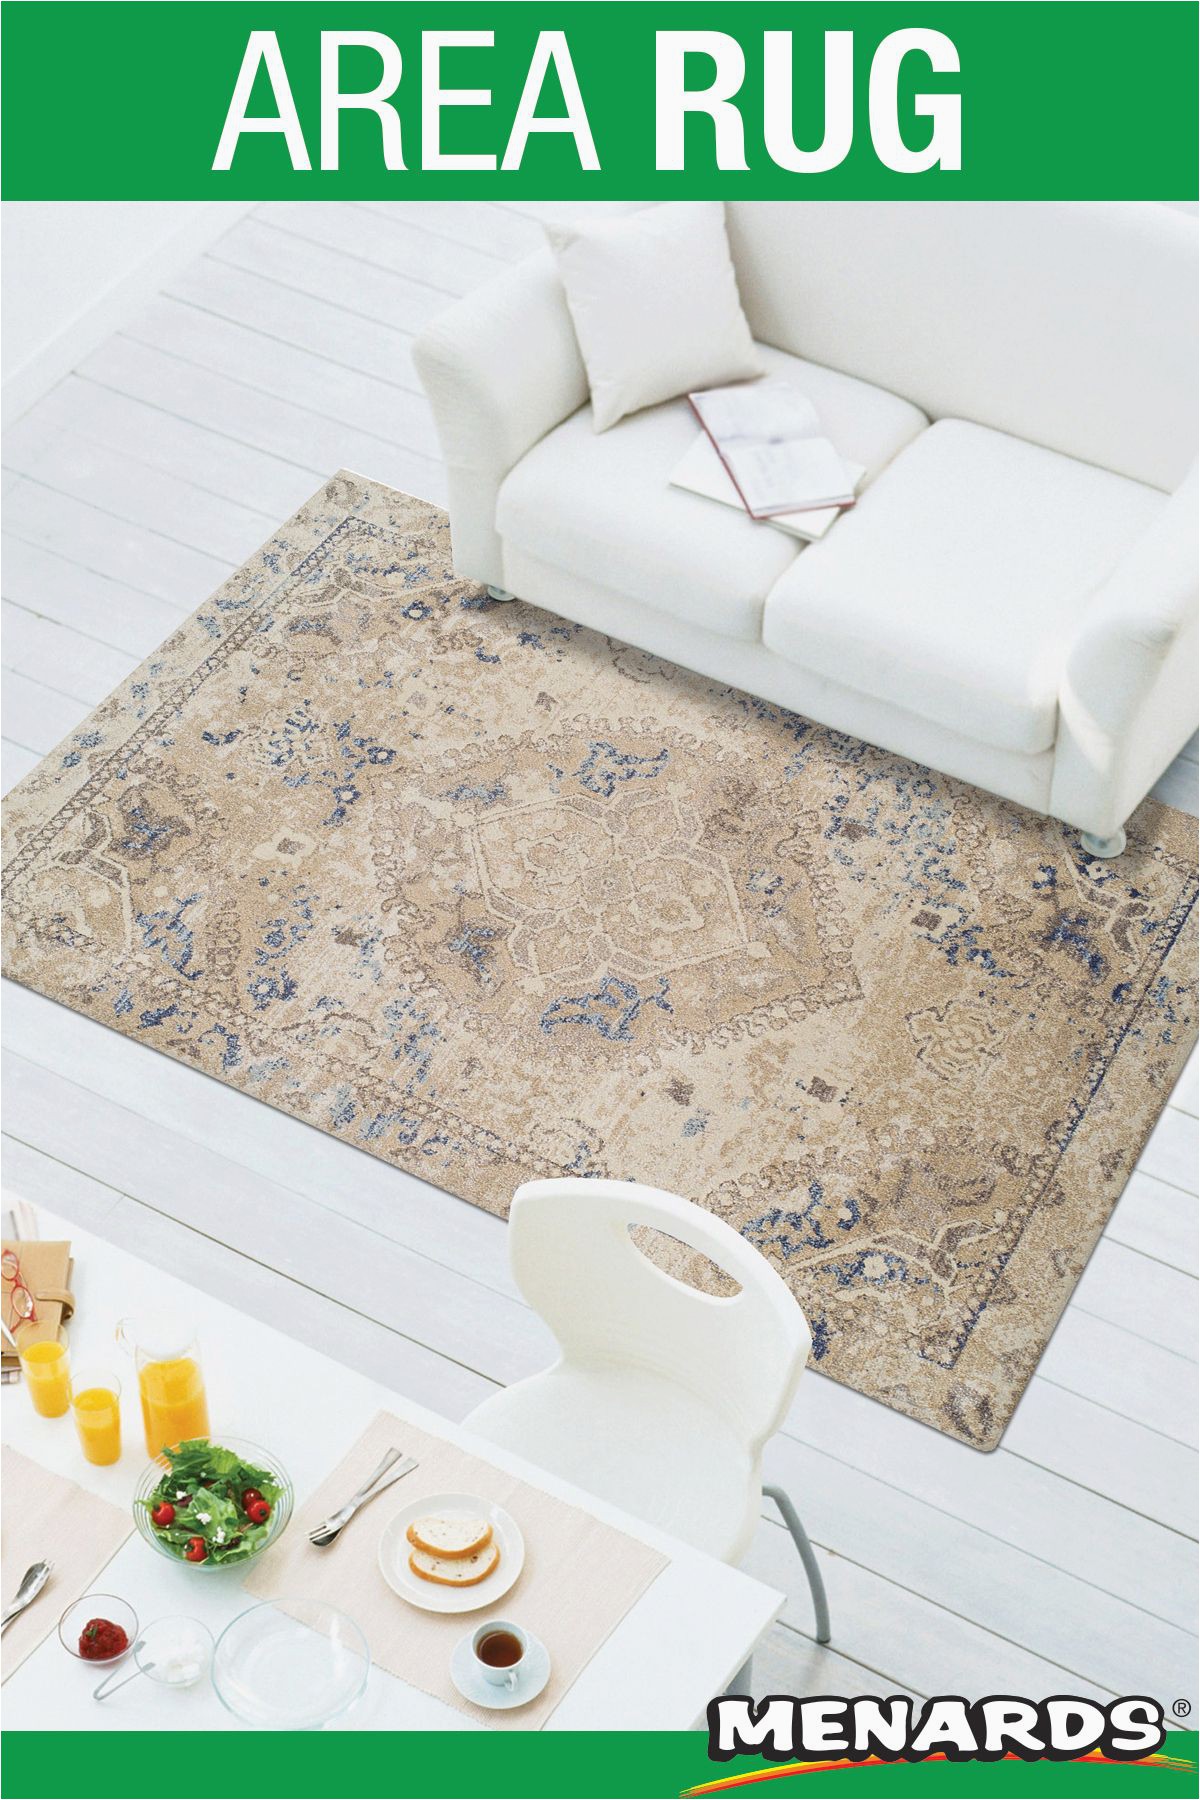 Does Menards Have area Rugs the Carson Rug by Dalyn Offers A Old World Traditional Look